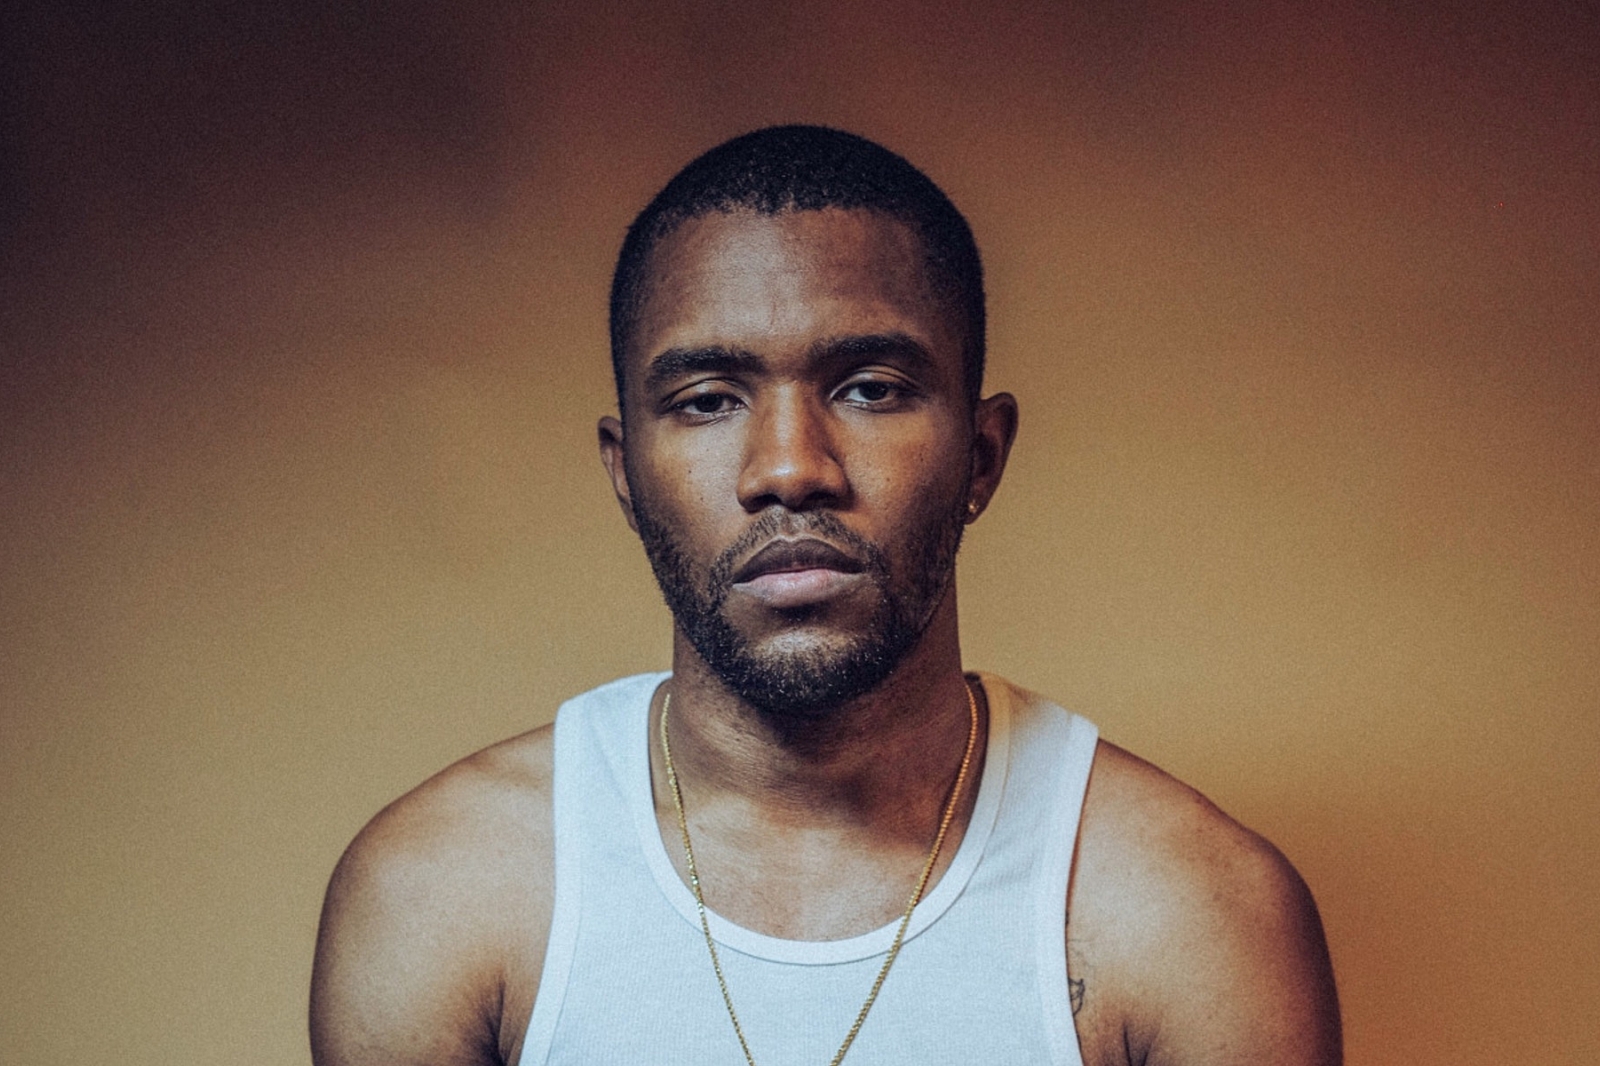 Frank Ocean interviews Jay Z as part of his new Beats 1 show